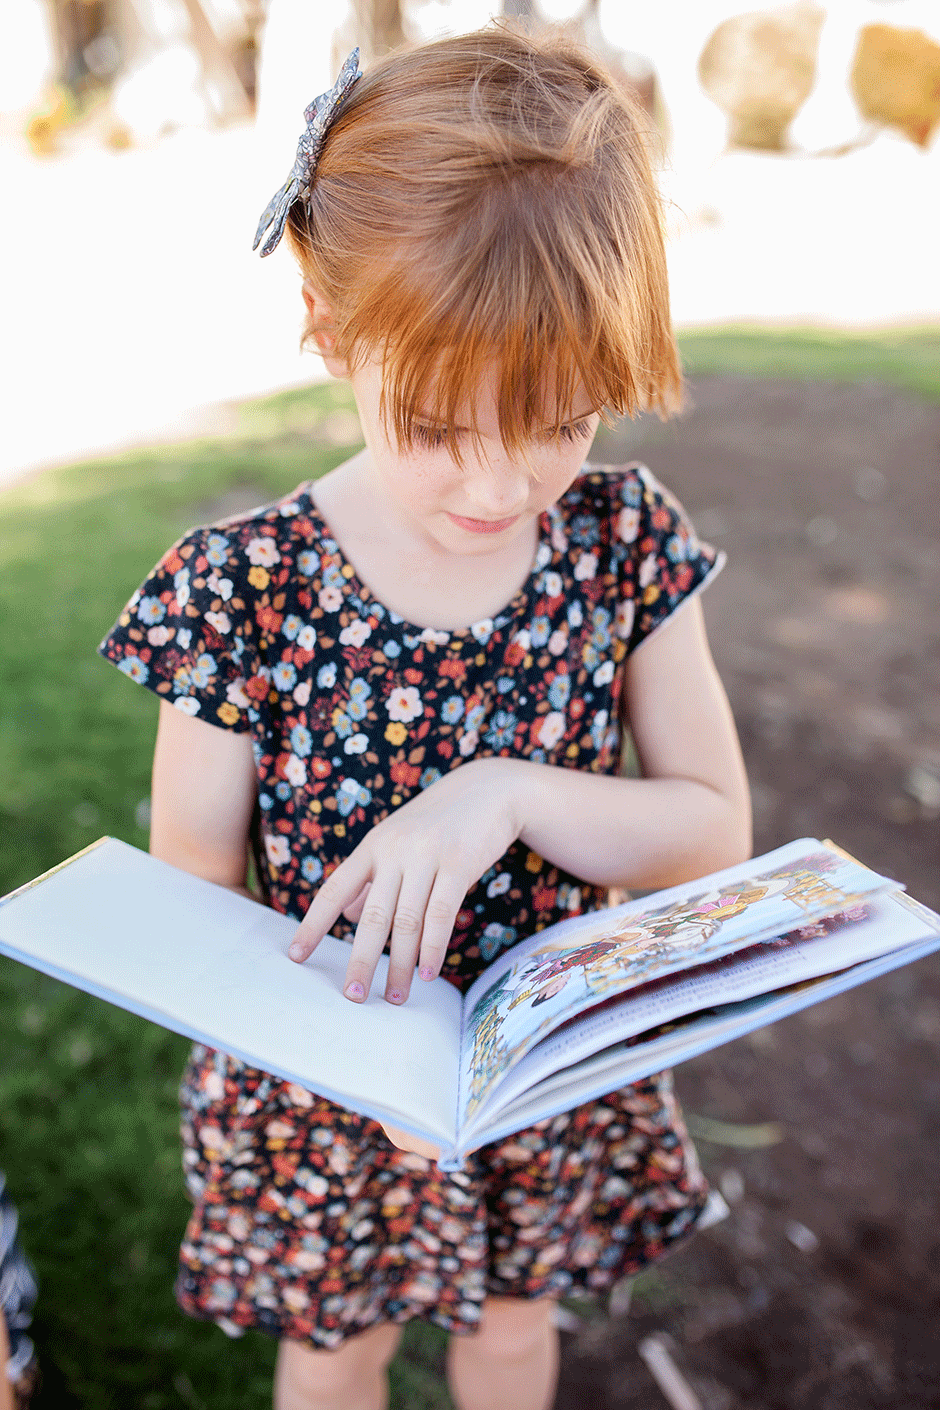 Ever wondered what it'd be like to homeschool your kids? And then get worried about logistics, socialization, and the chaos? Get the encouragement you need!